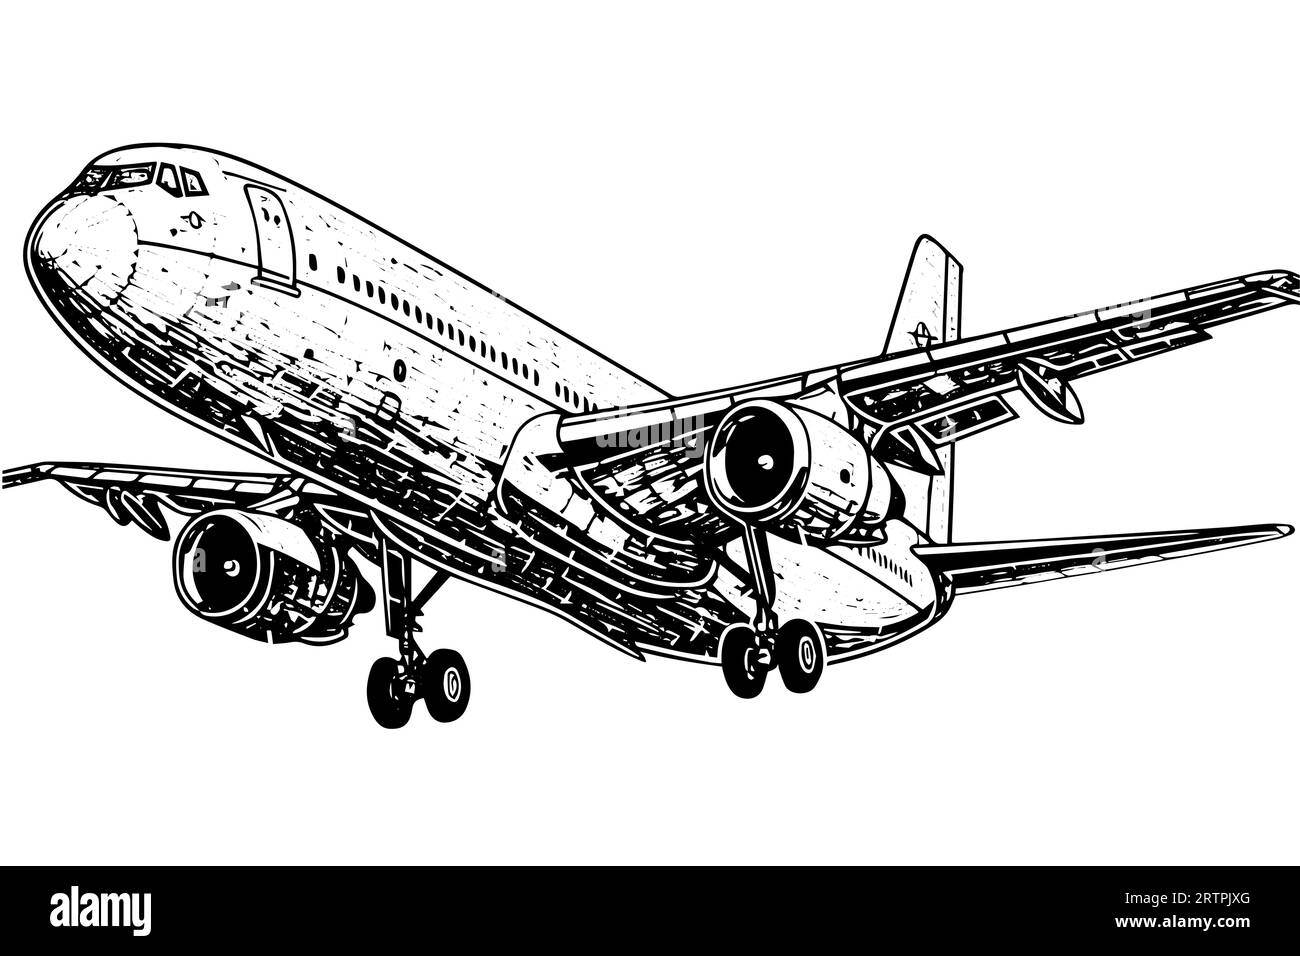 Hand drawn ink sketch of airplane. Engraving style vector illustration. Stock Vector